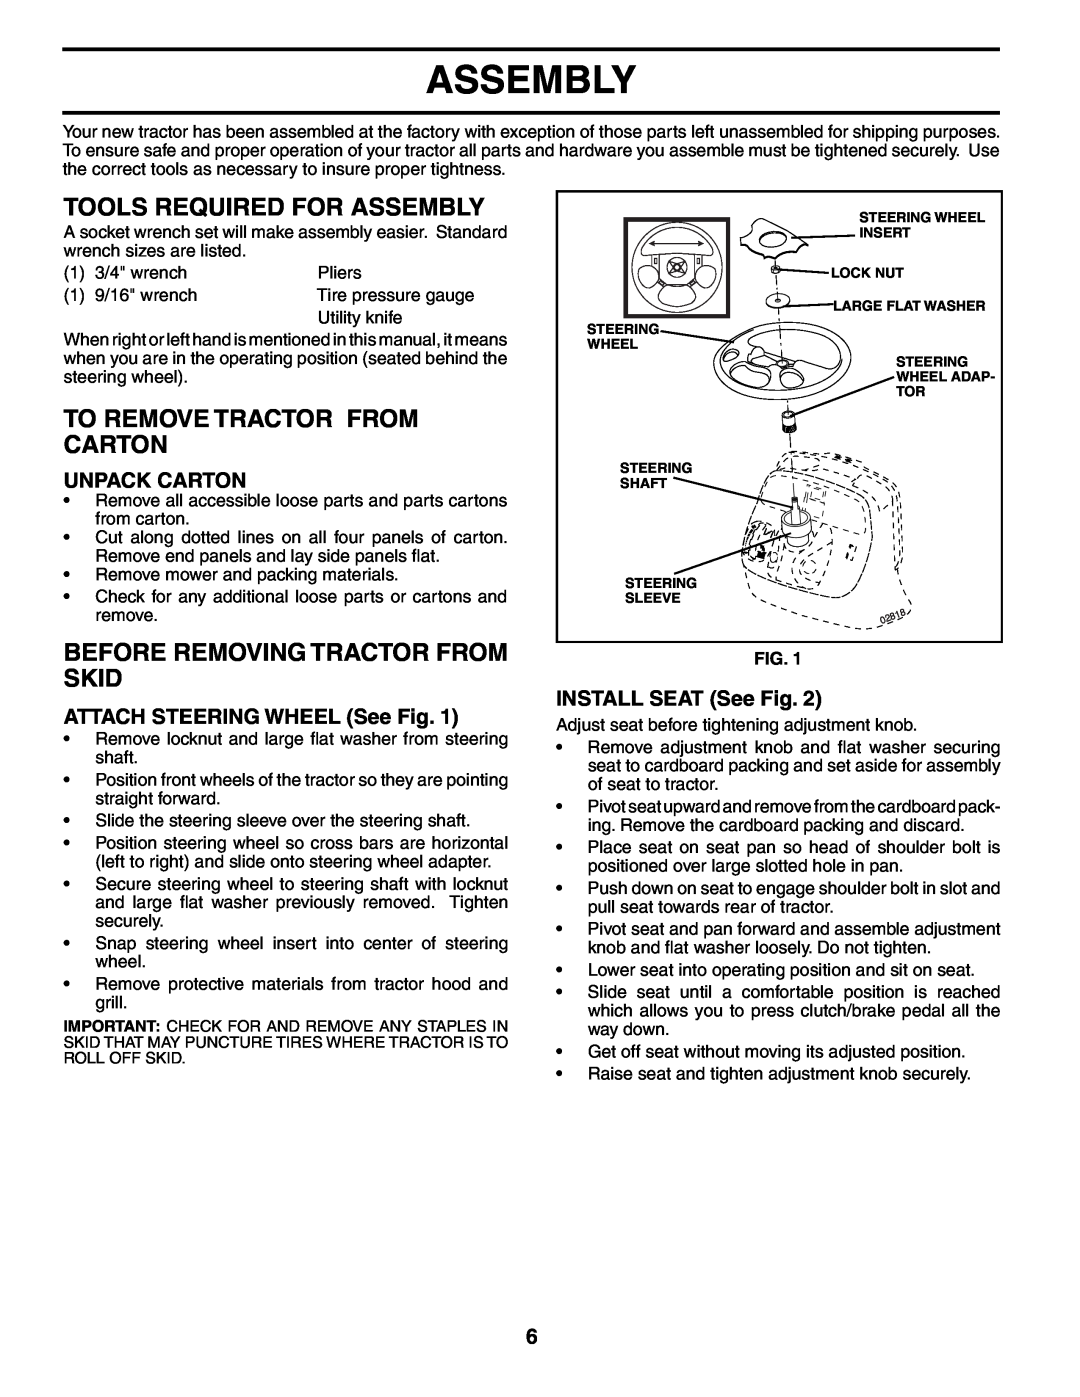 Poulan XT24H48YT manual Tools Required For Assembly, To Remove Tractor From Carton, Before Removing Tractor From Skid 